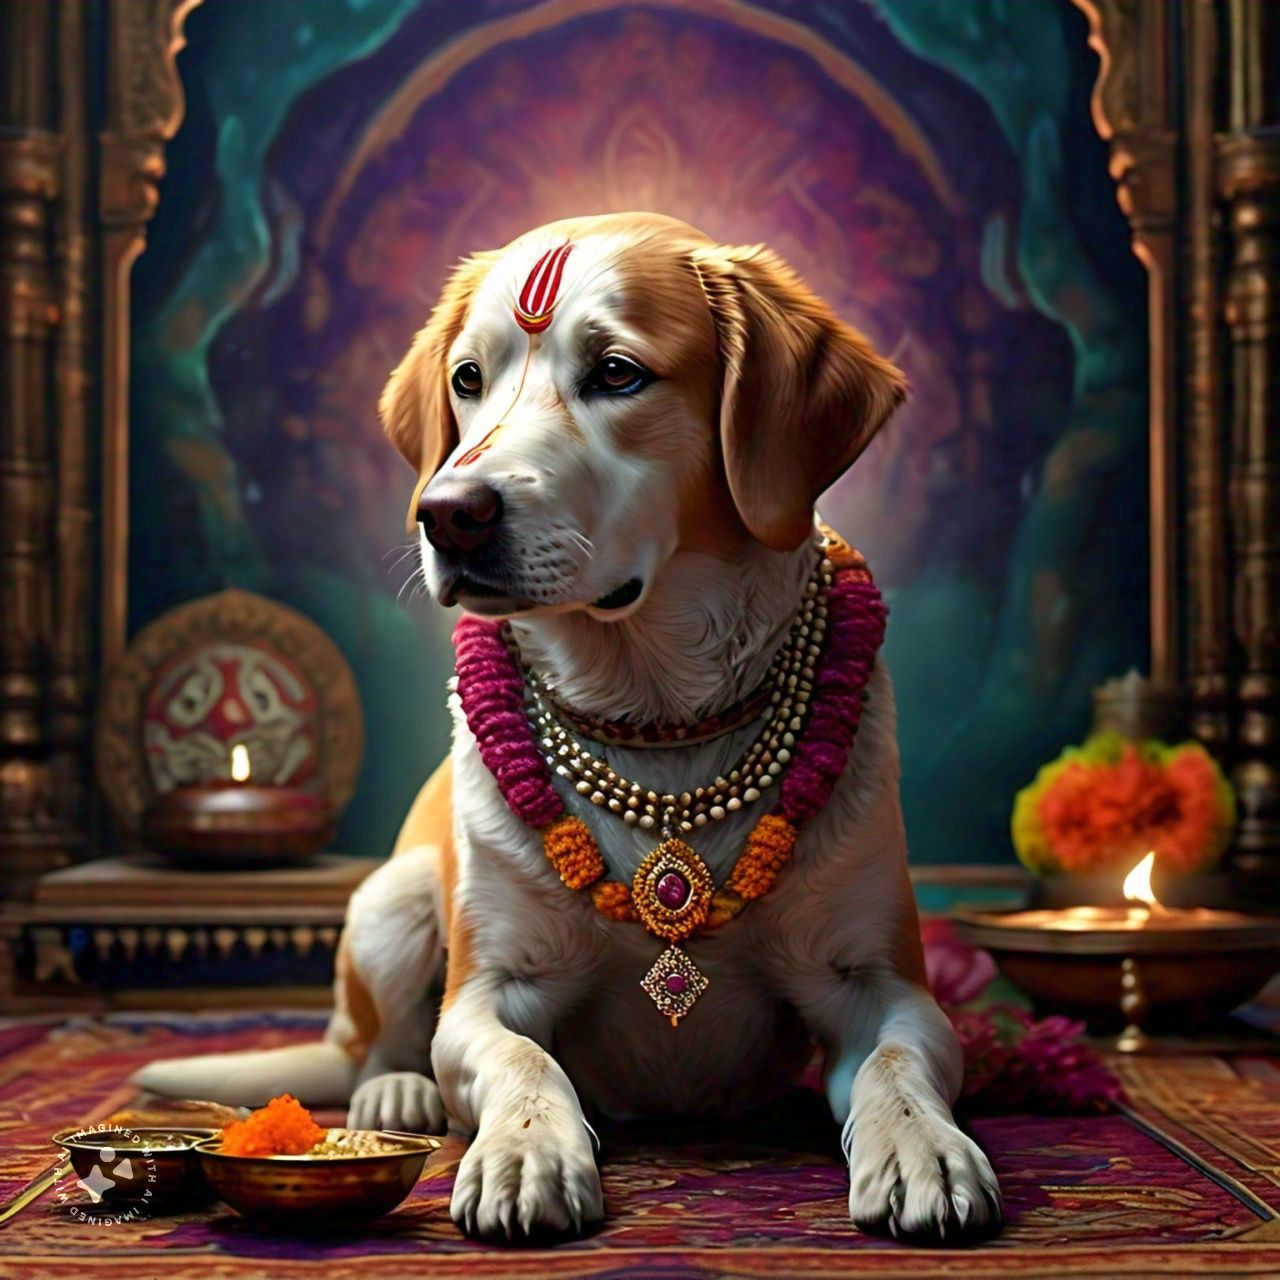 Dogs Have A Special Place In Hindu Mythology